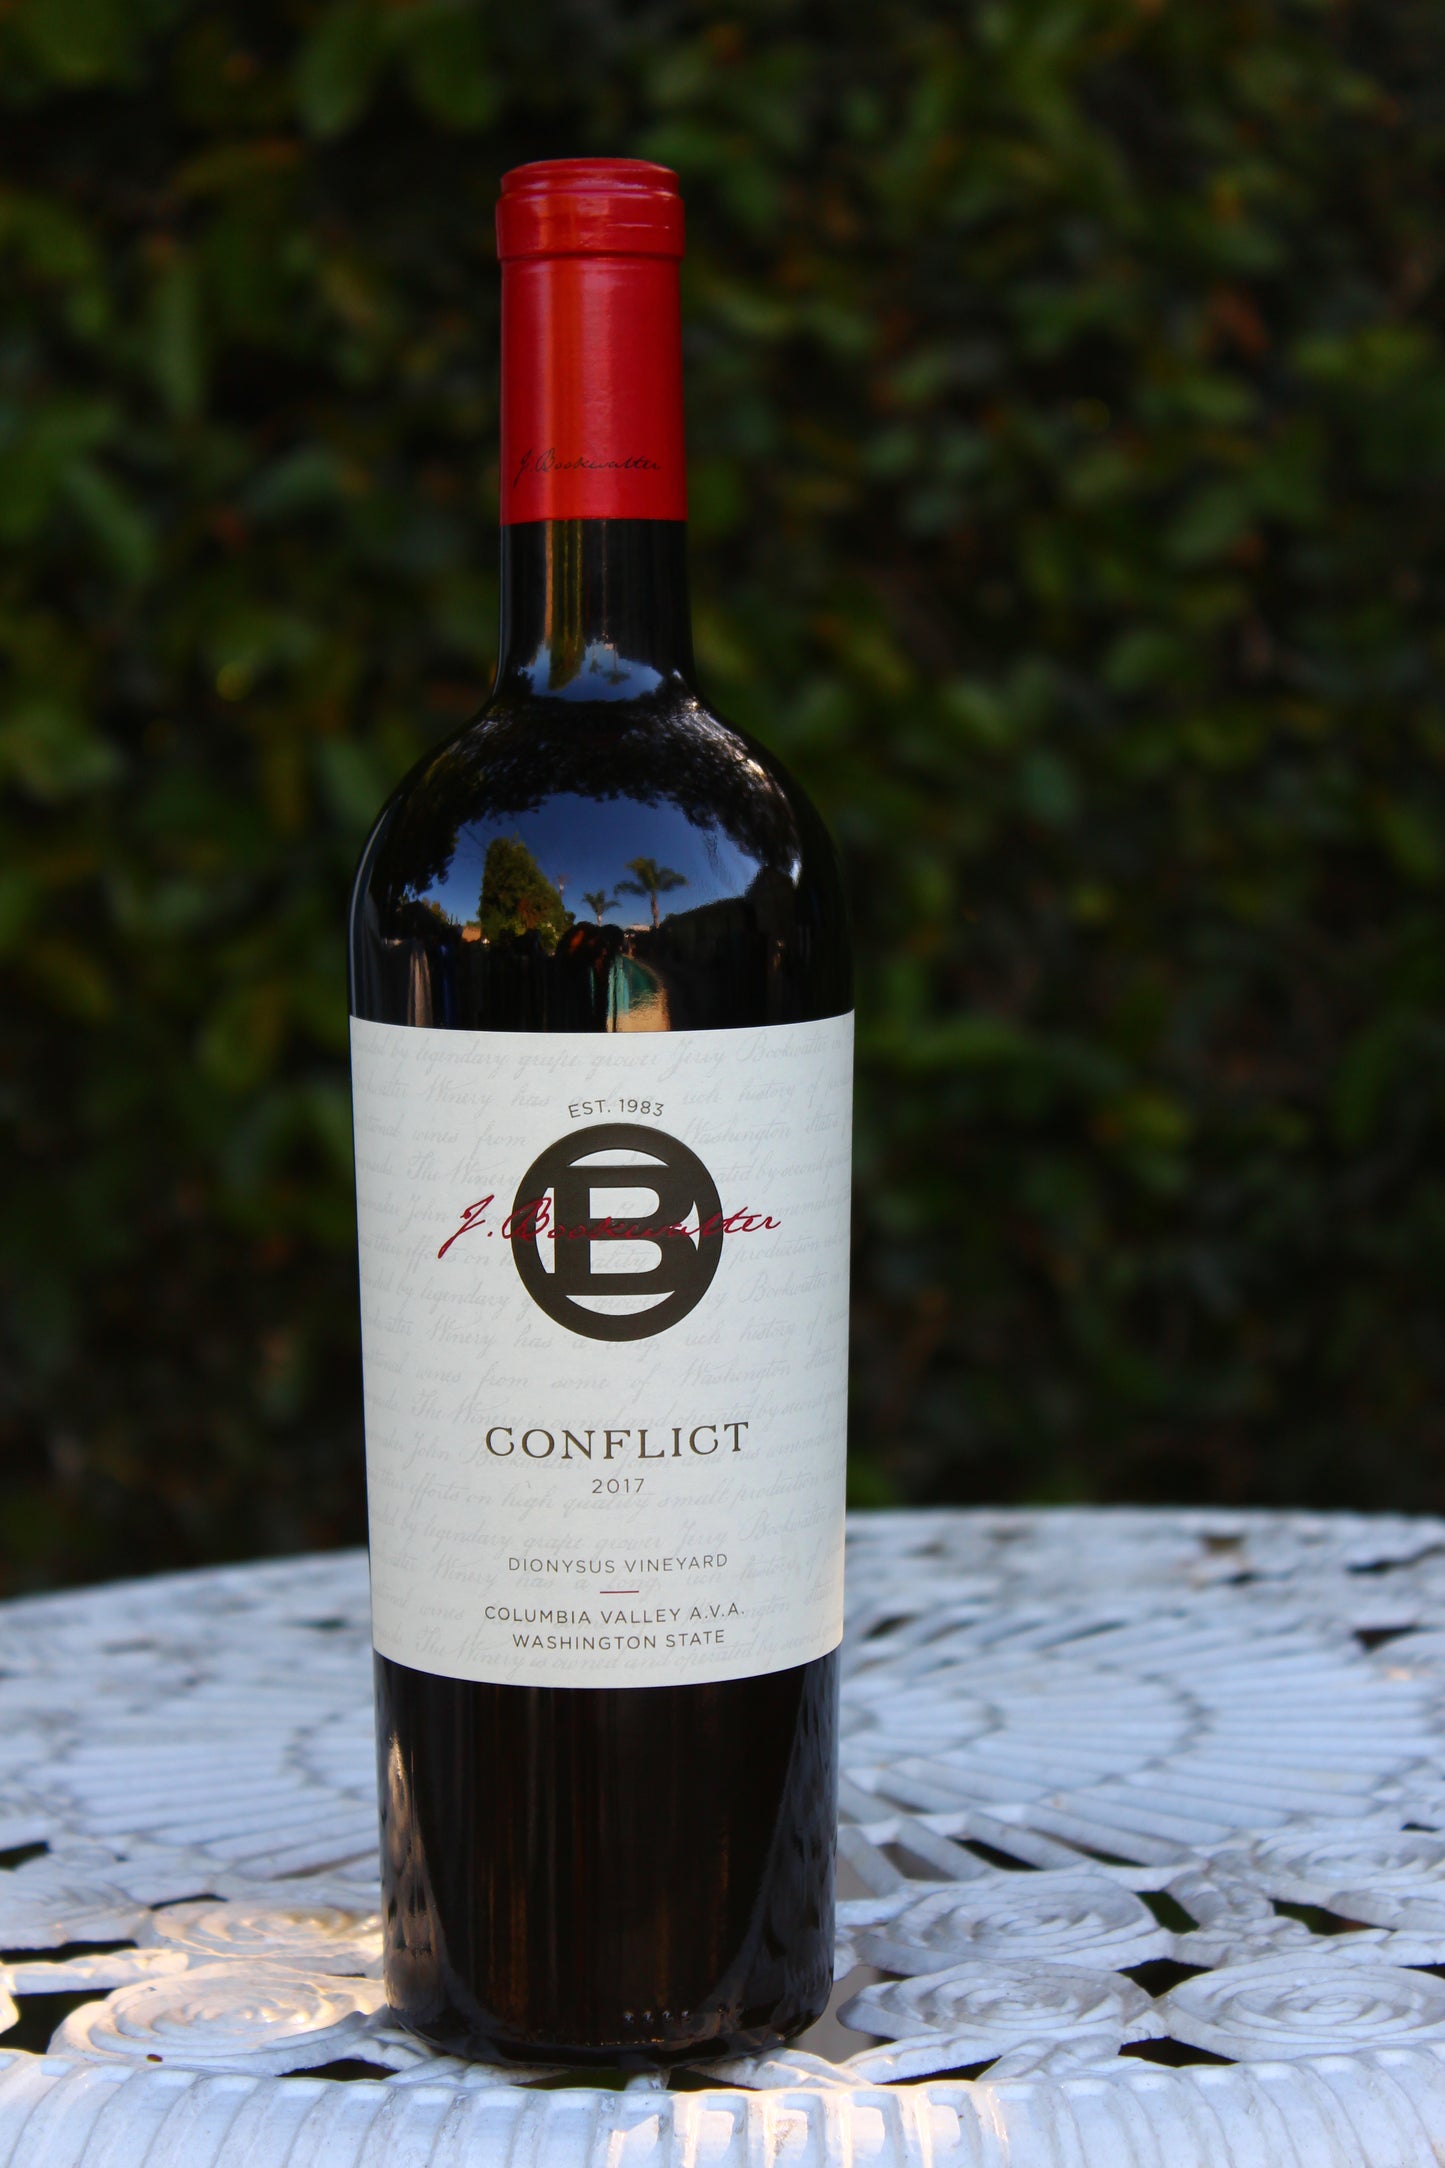 J Bookwalter "Conflict" Red Blend